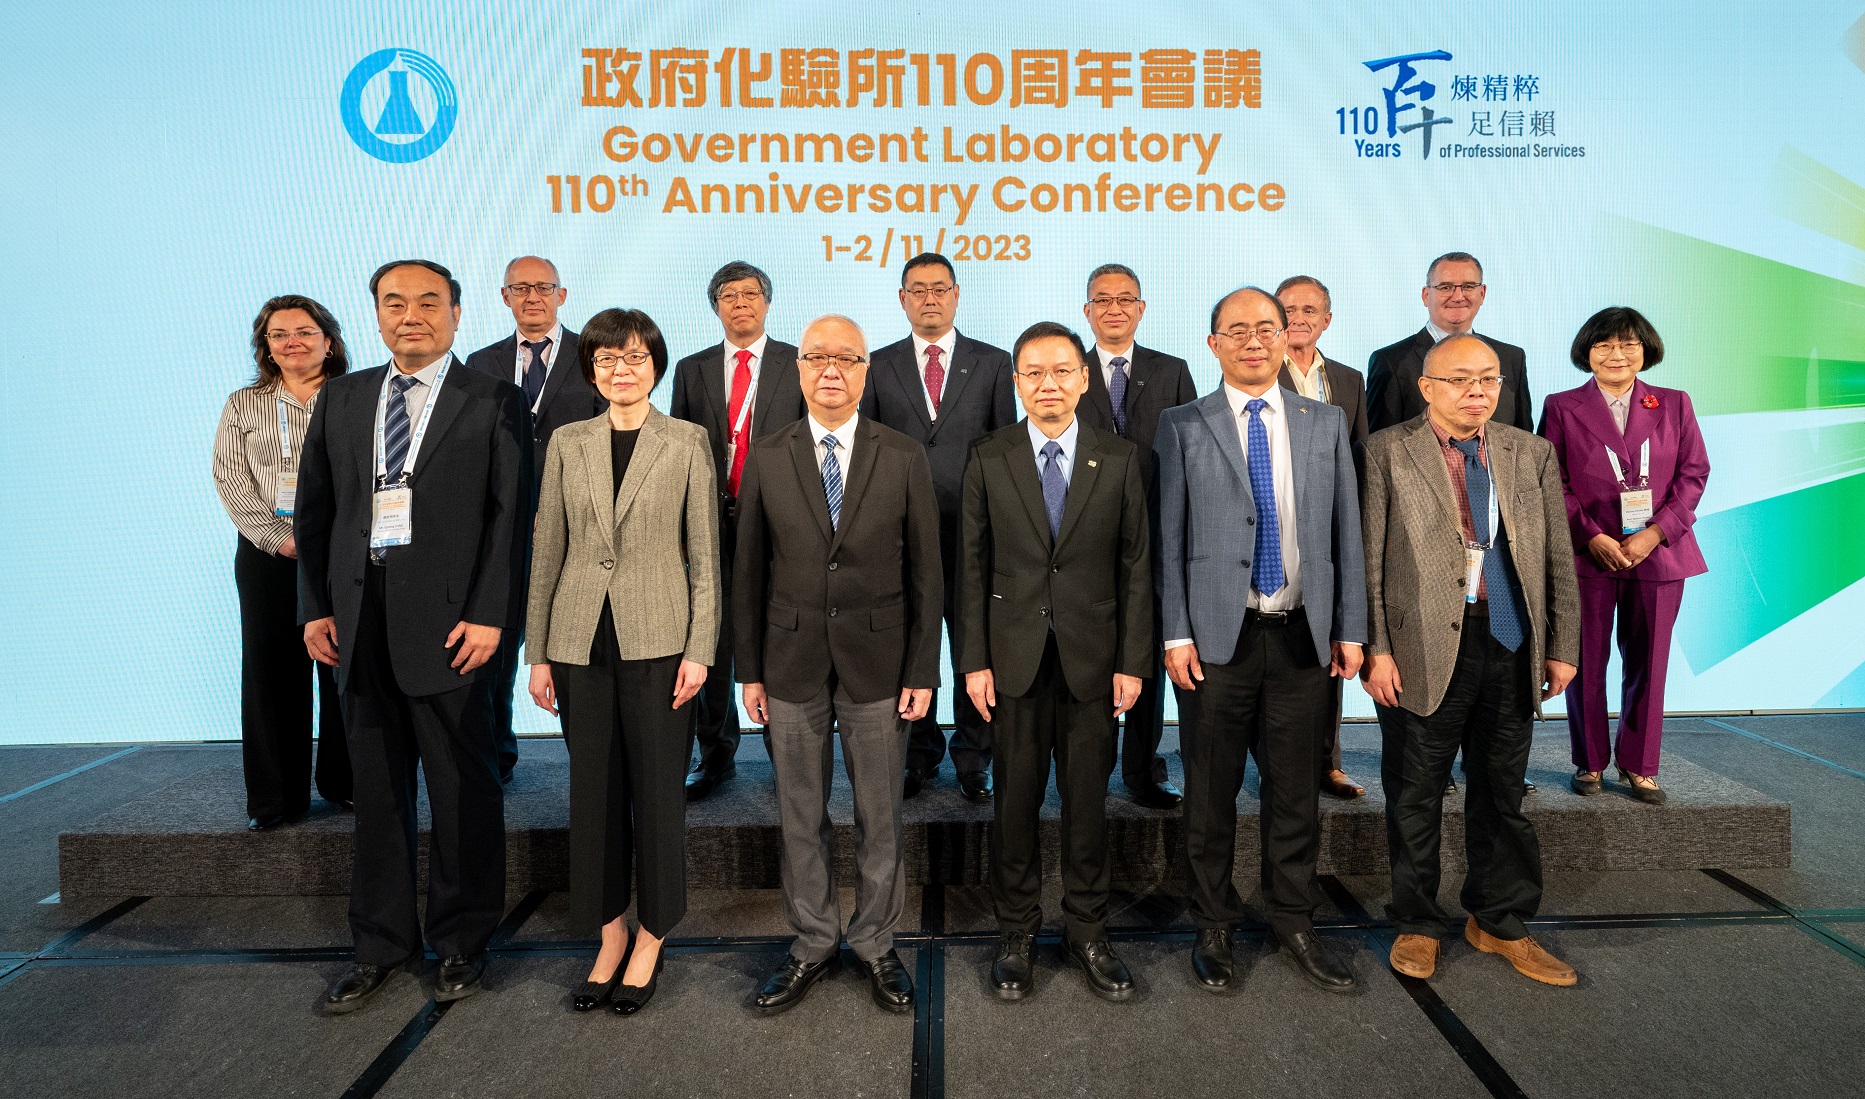 Photo 4: Group photo of distinguished speakers presenting on 1 November 2023.